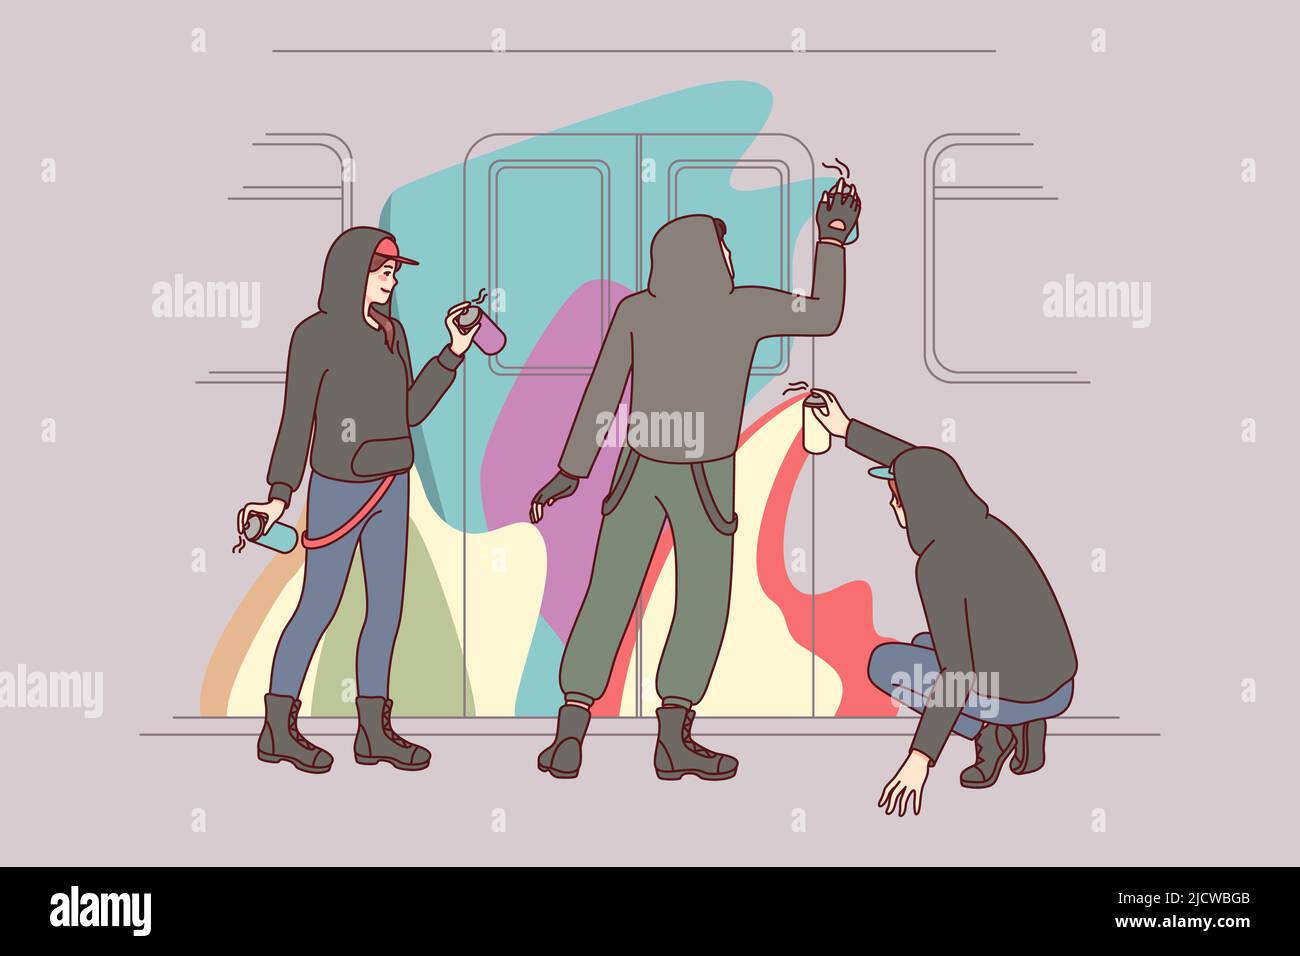 People painting subway train with graffiti. Vandals drawing subculture art with aerosol paints on train. Vandalism and sabotage concept. Vector illustration.  Stock Vector